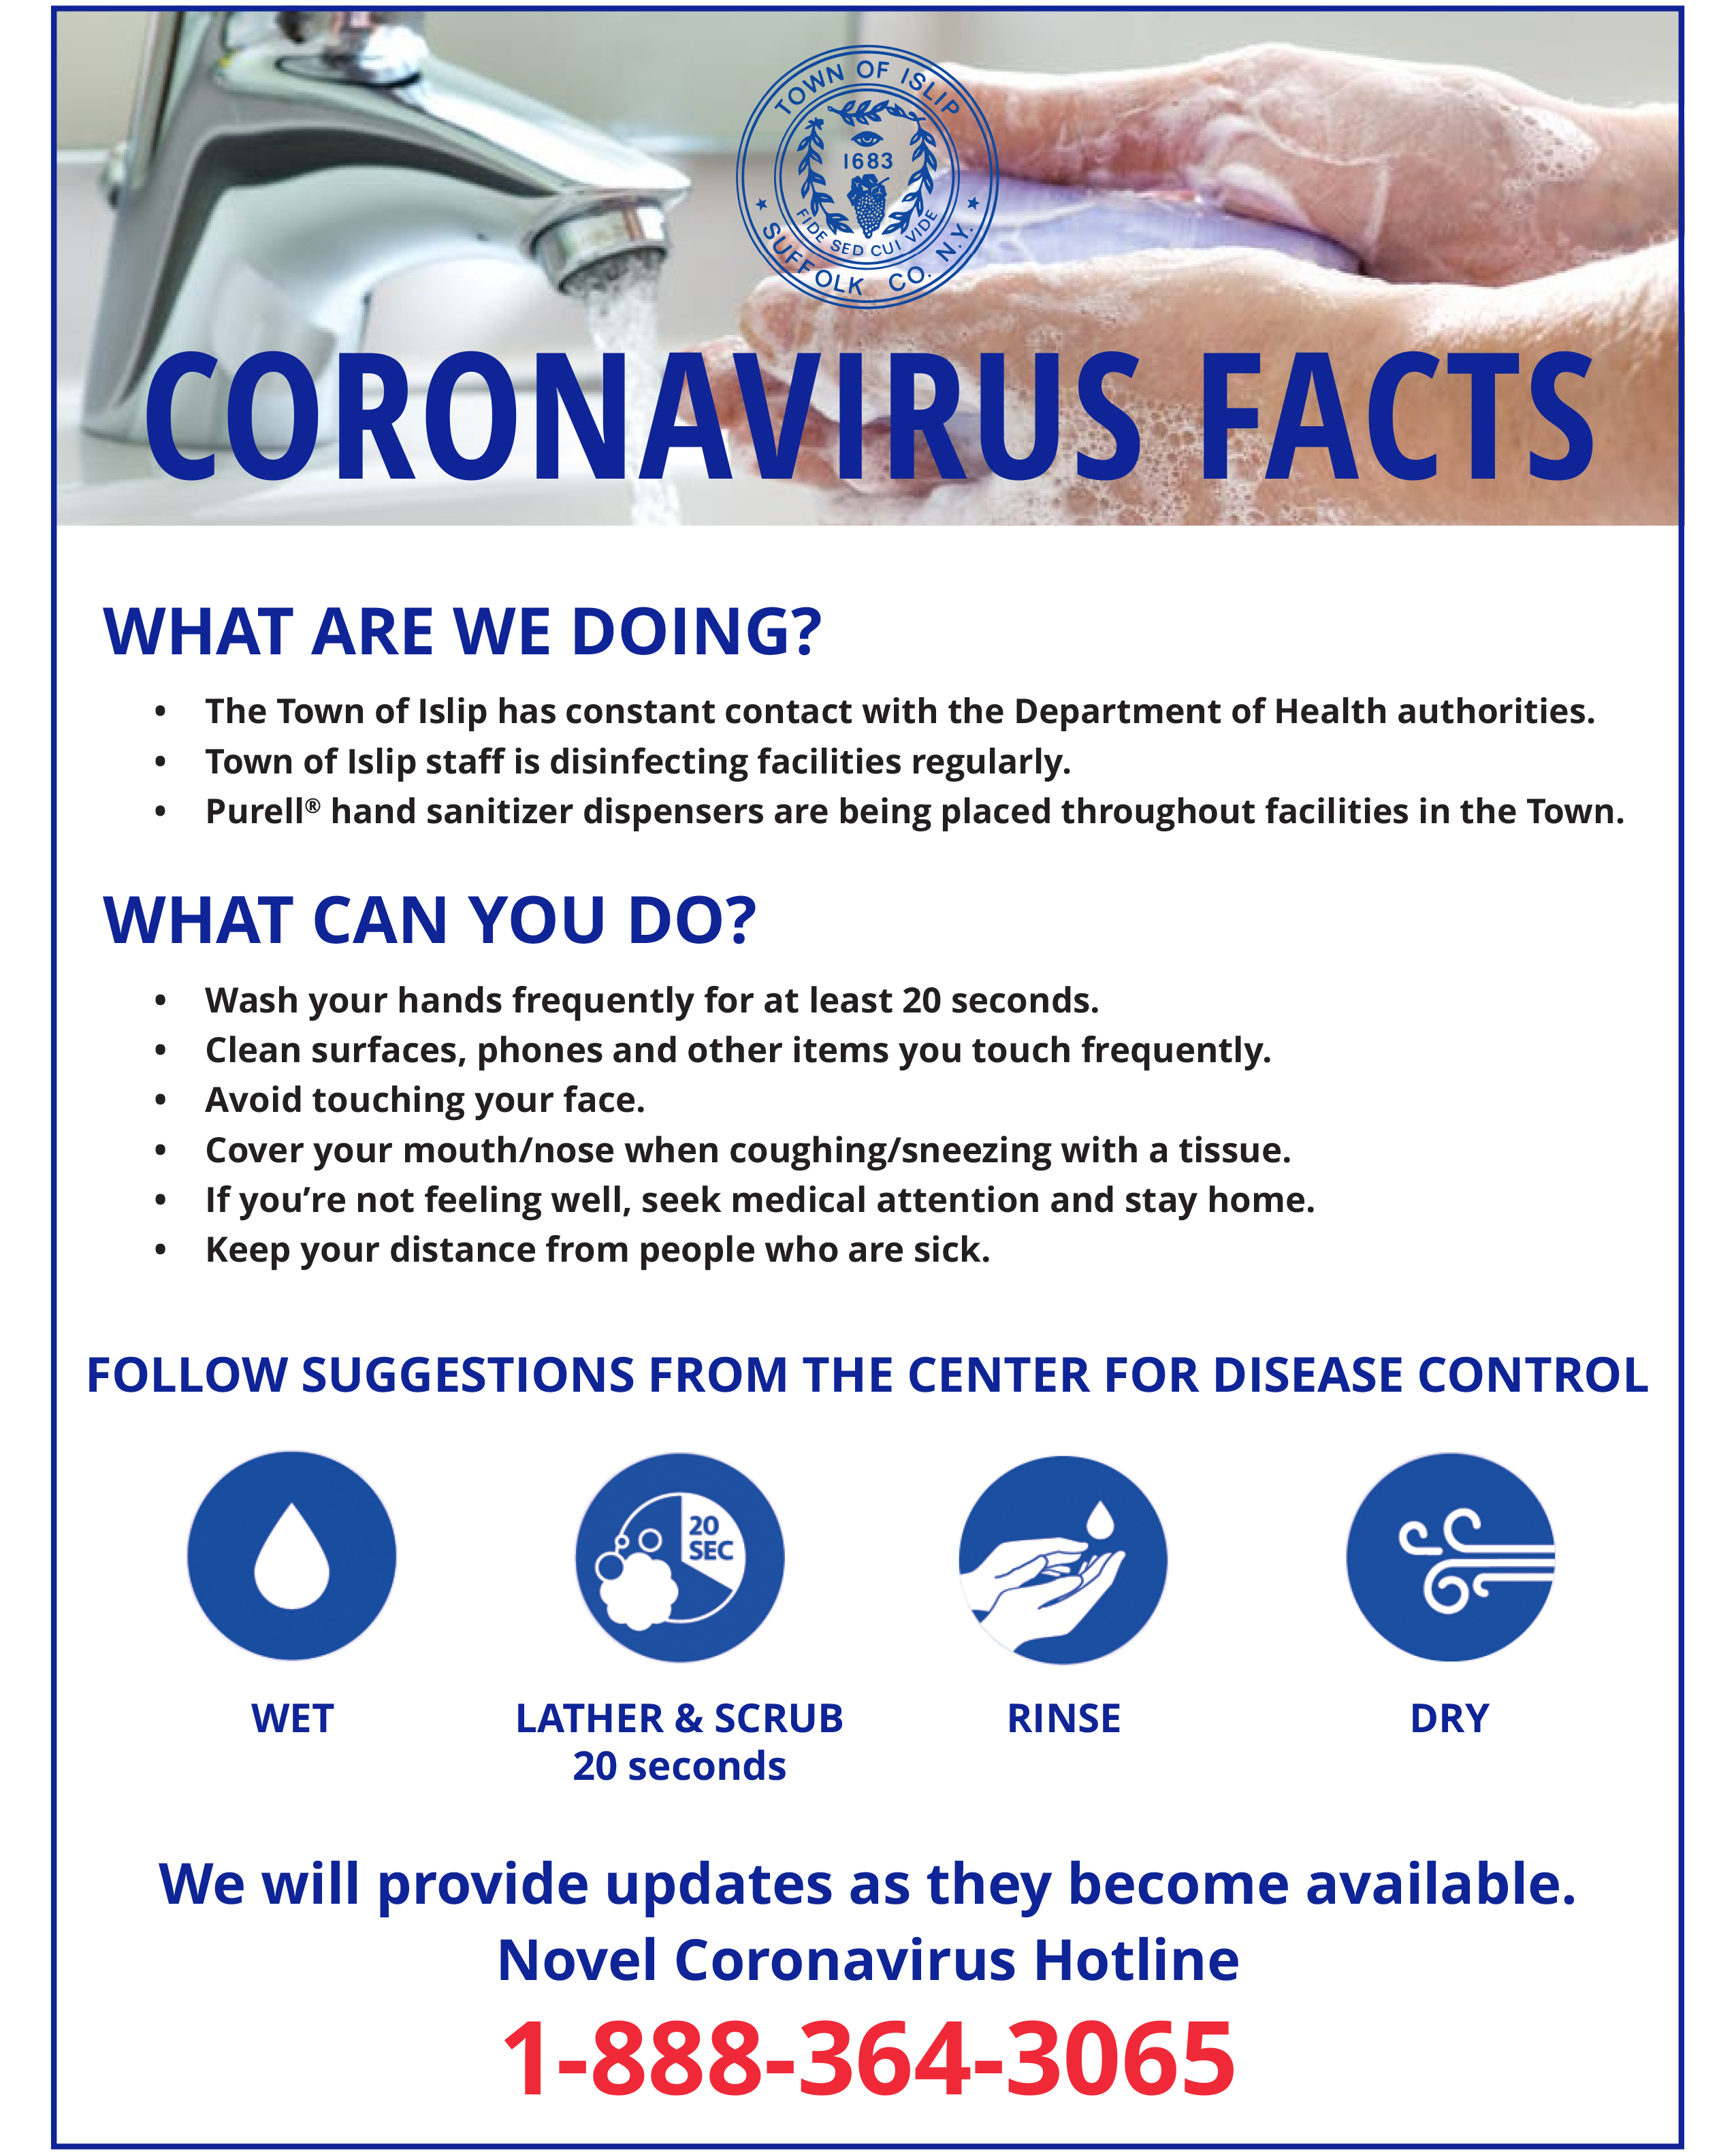 a flyer for novel coronavirus facts, call the hotline at 1-888-364-3065 for more information